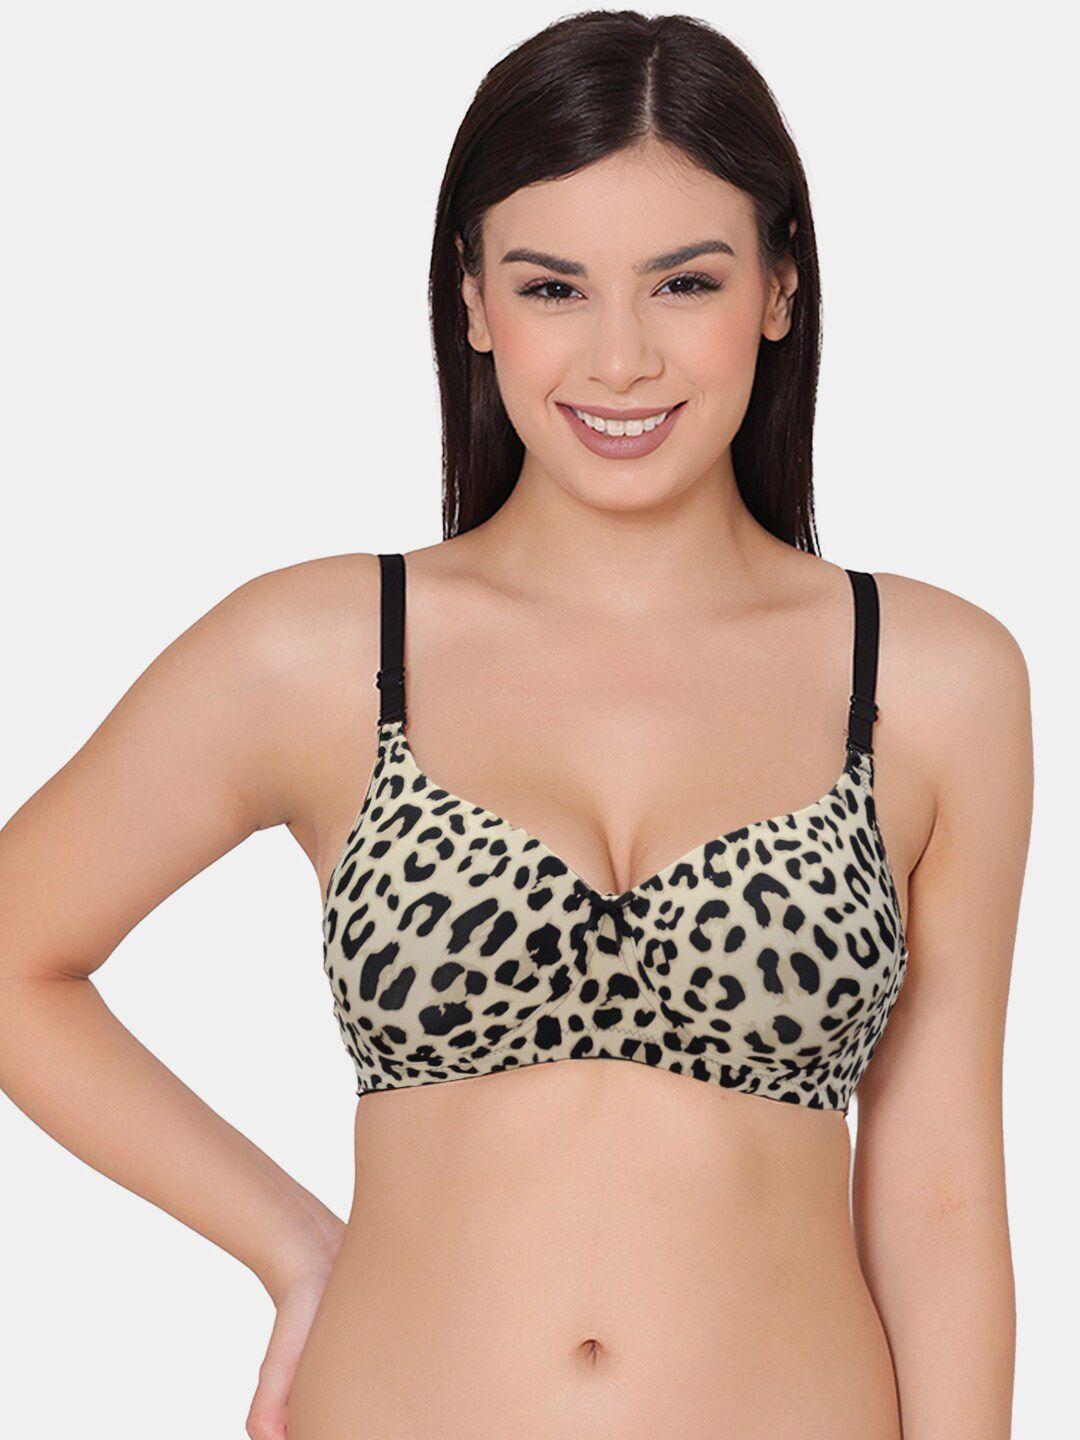 groversons-paris-beauty-animal-printed-full-coverage-lightly-padded-bra